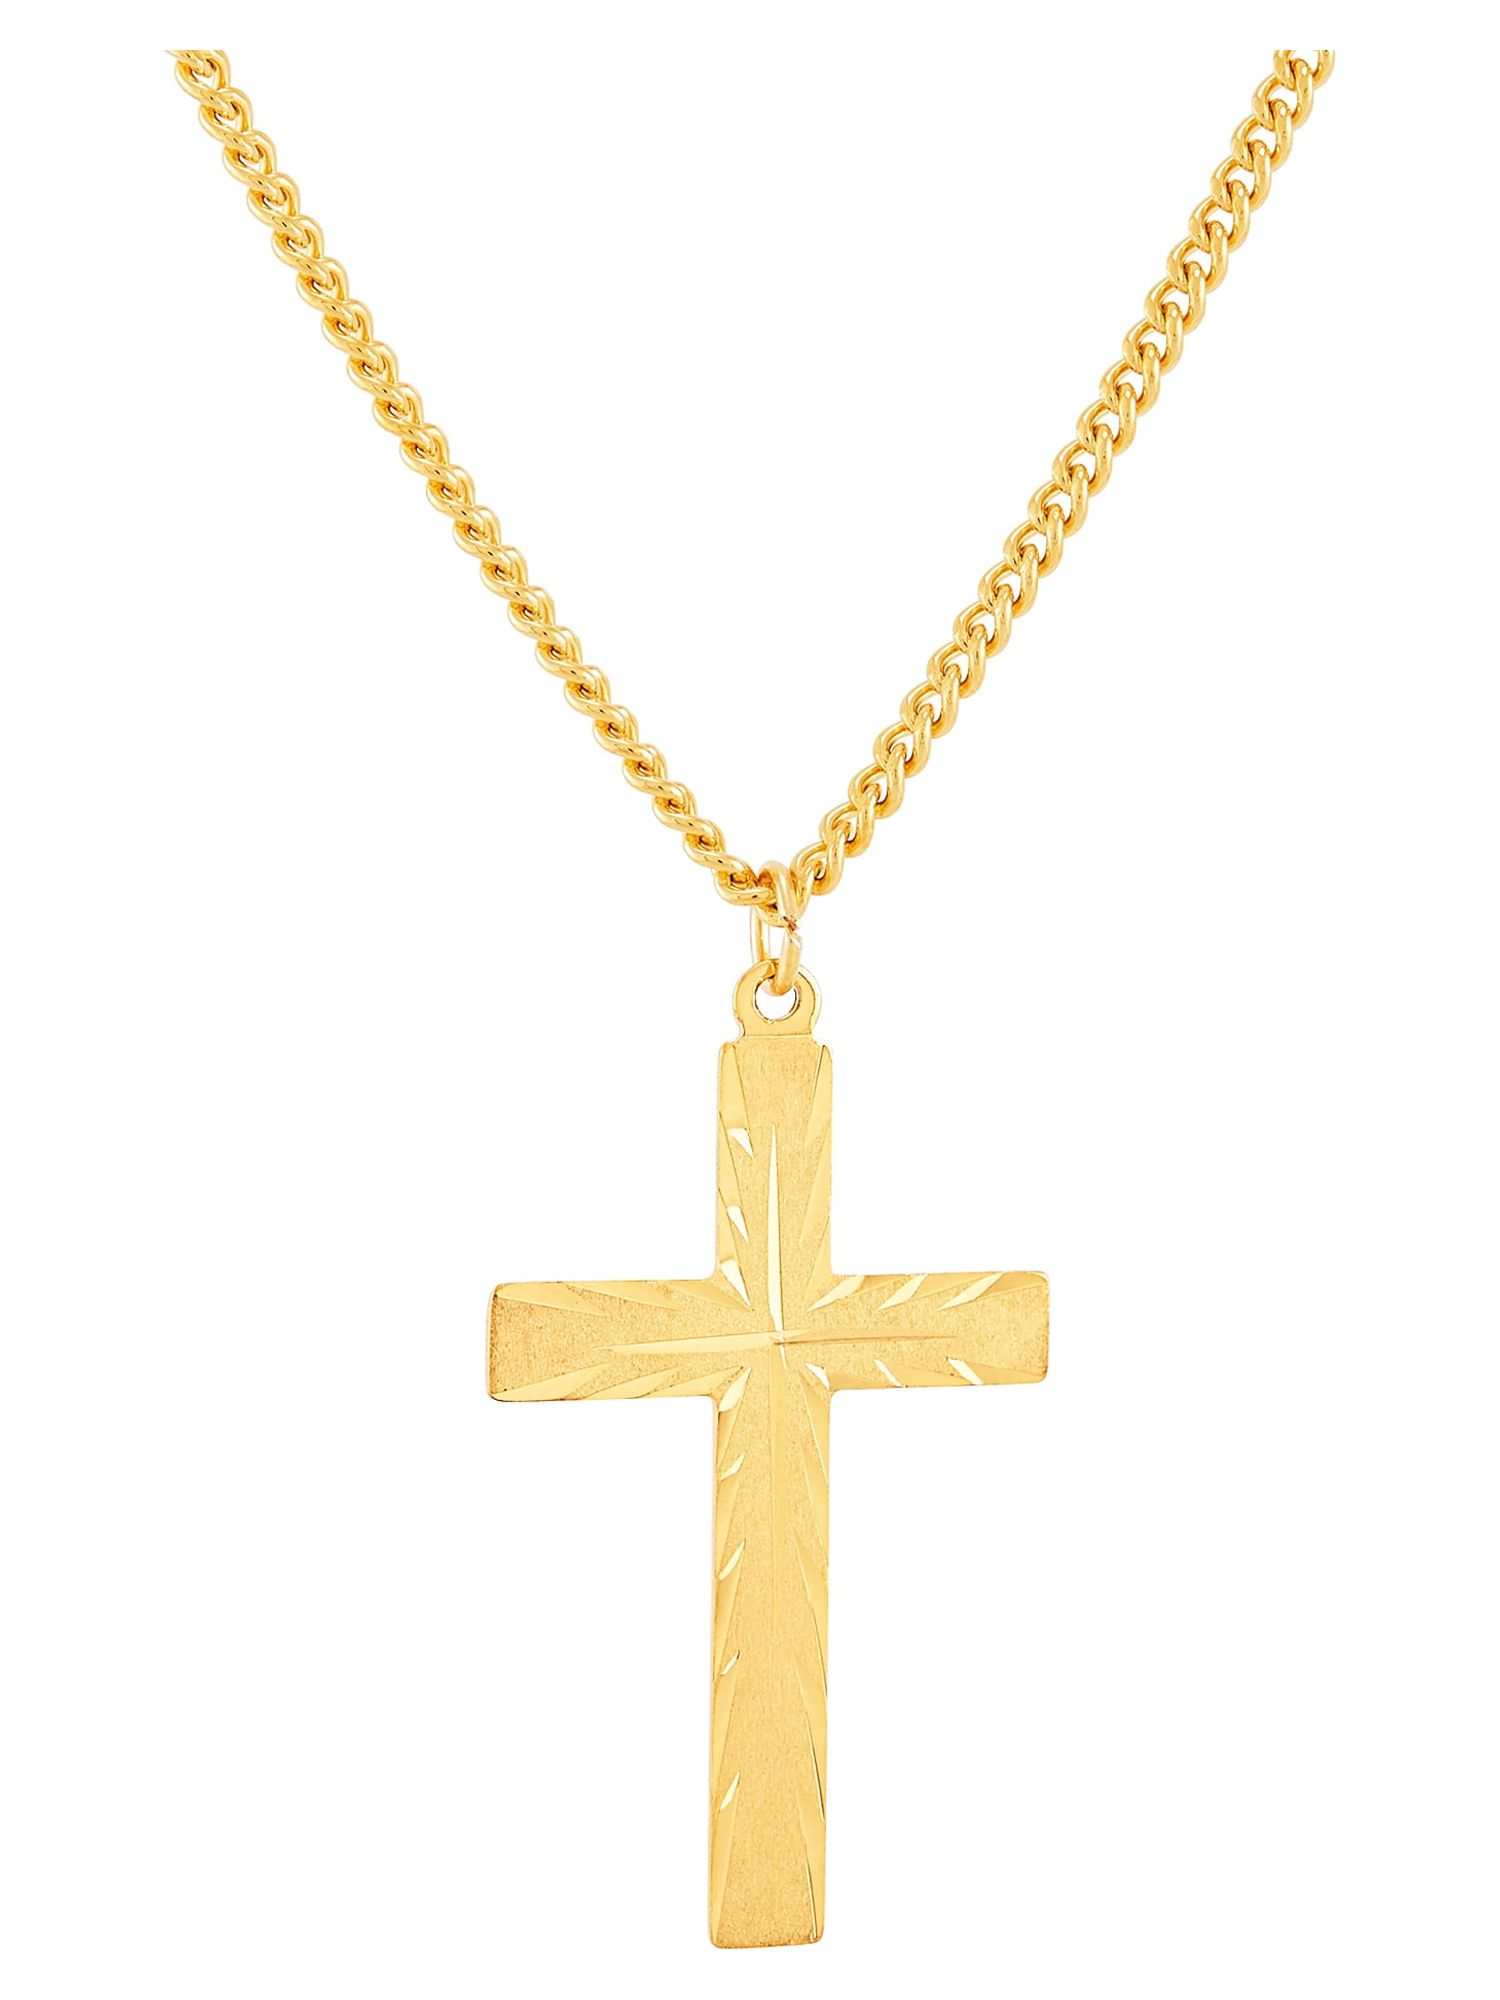 Brilliance Fine Jewelry Gold-Filled Cross Pendant, 24" Stainless Steel Chain - image 1 of 4